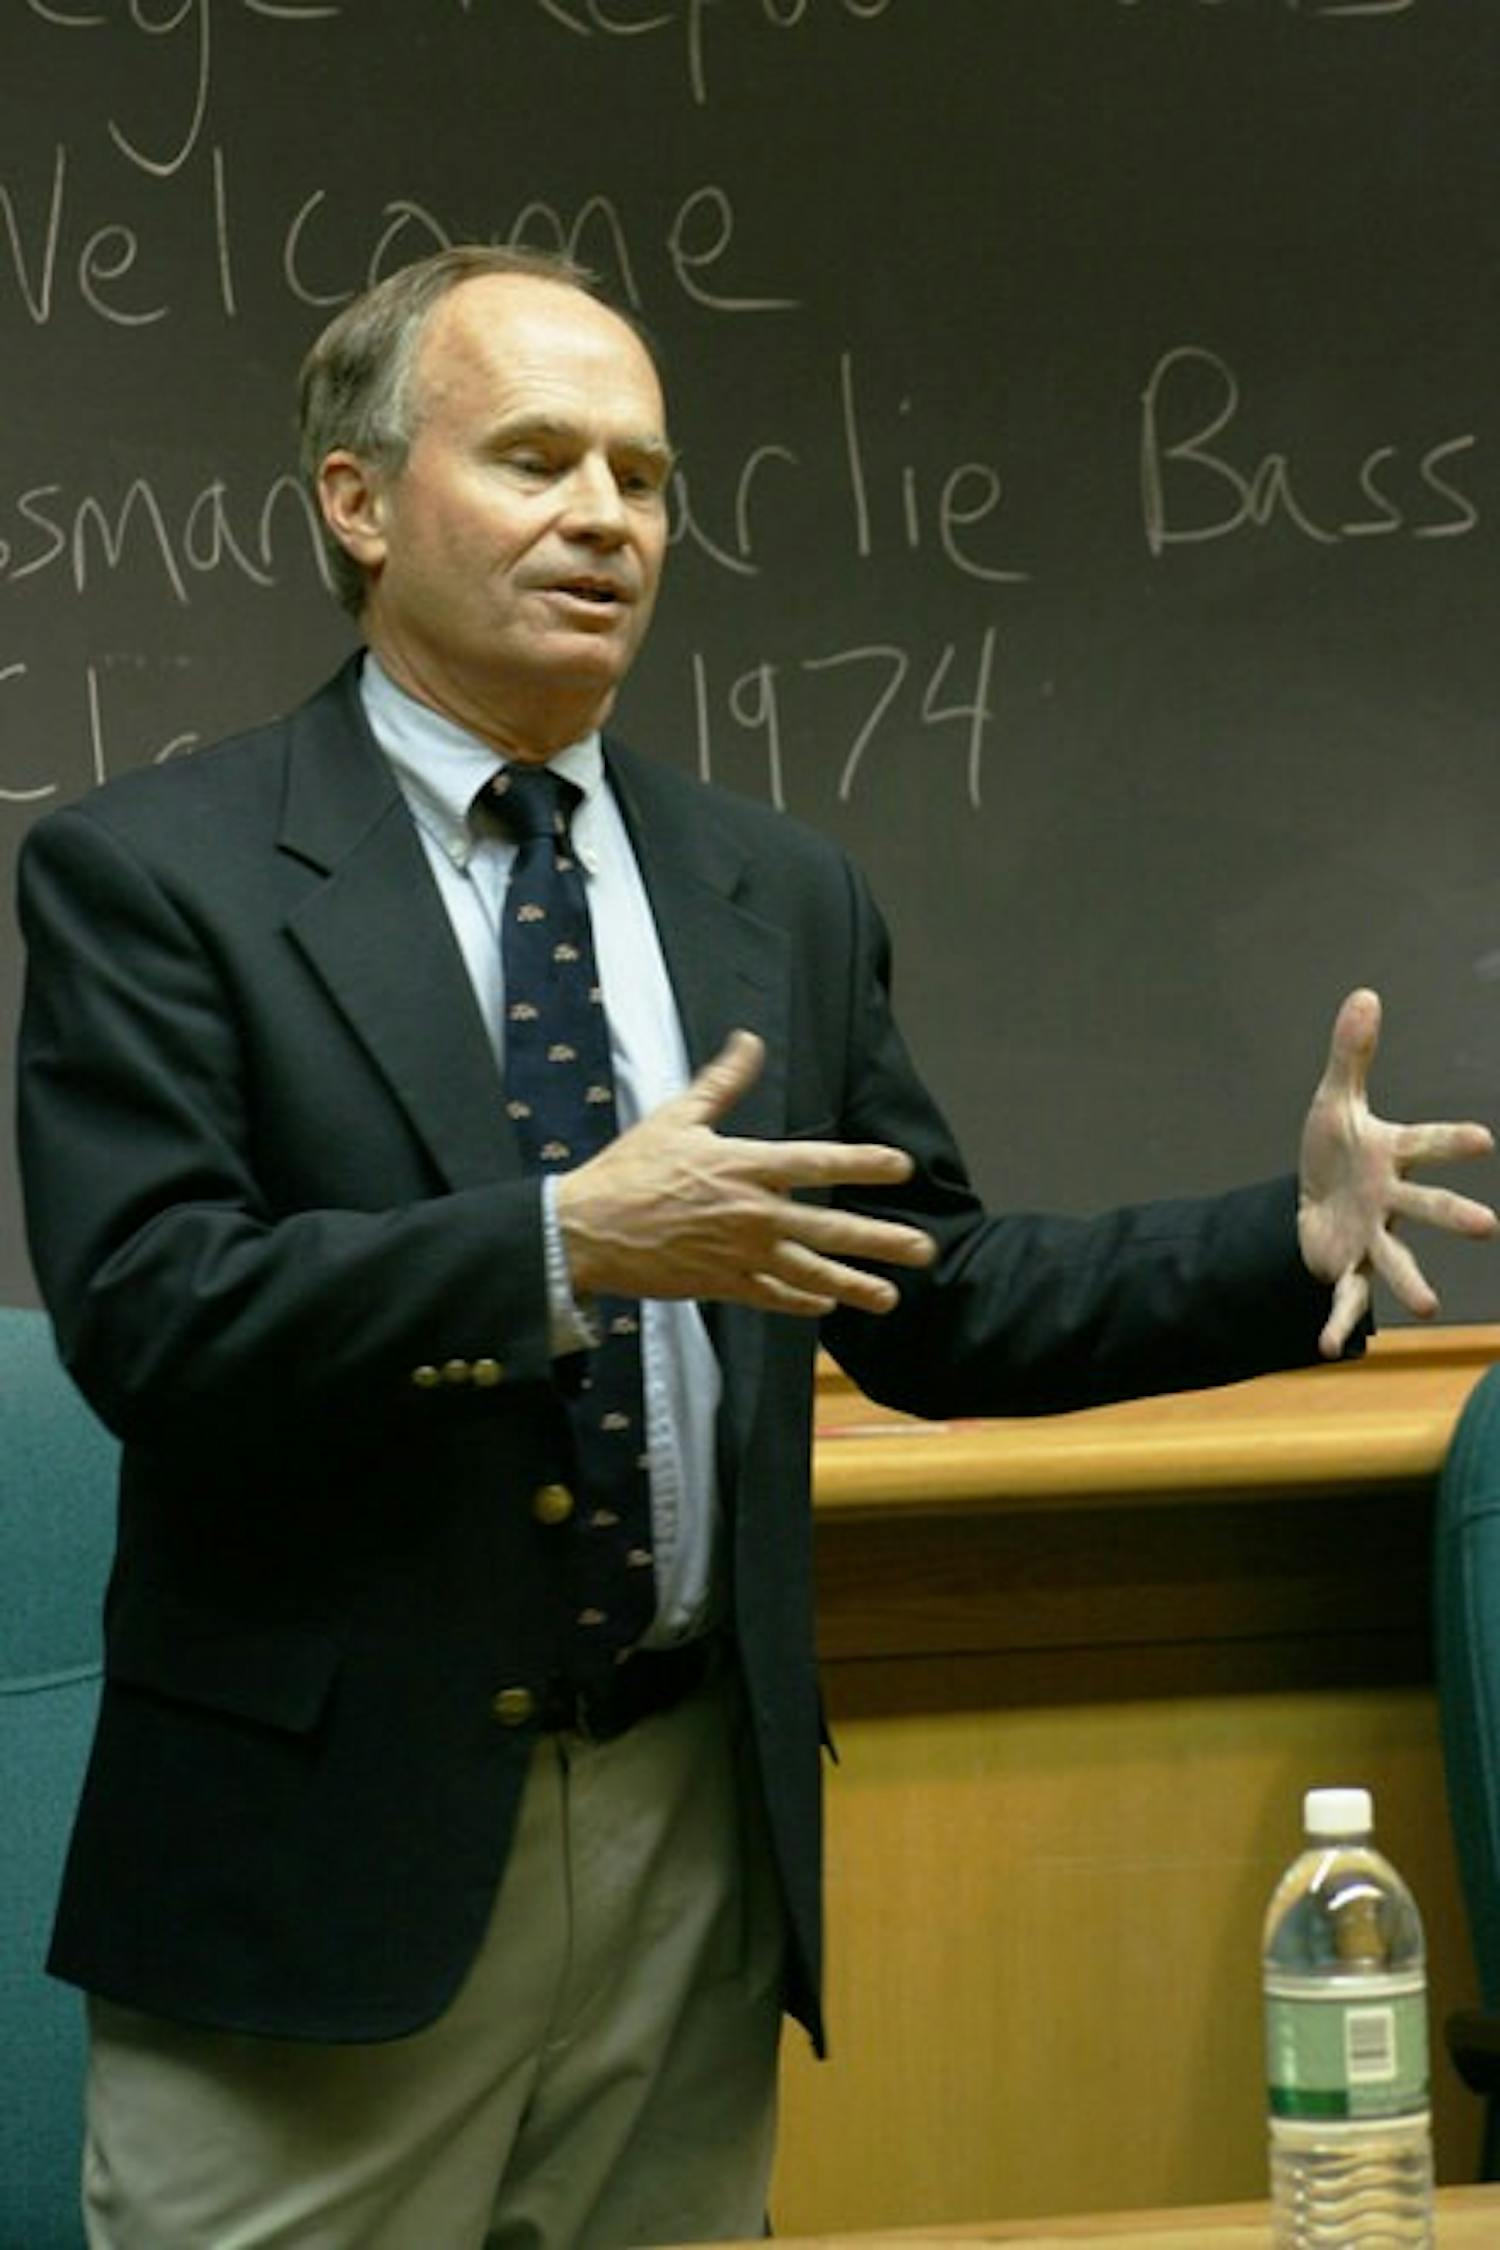 Former Congressman Charles Bass \'74 discussed moderate Republicanism Tuesday in a forum at the Rockefeller Center.